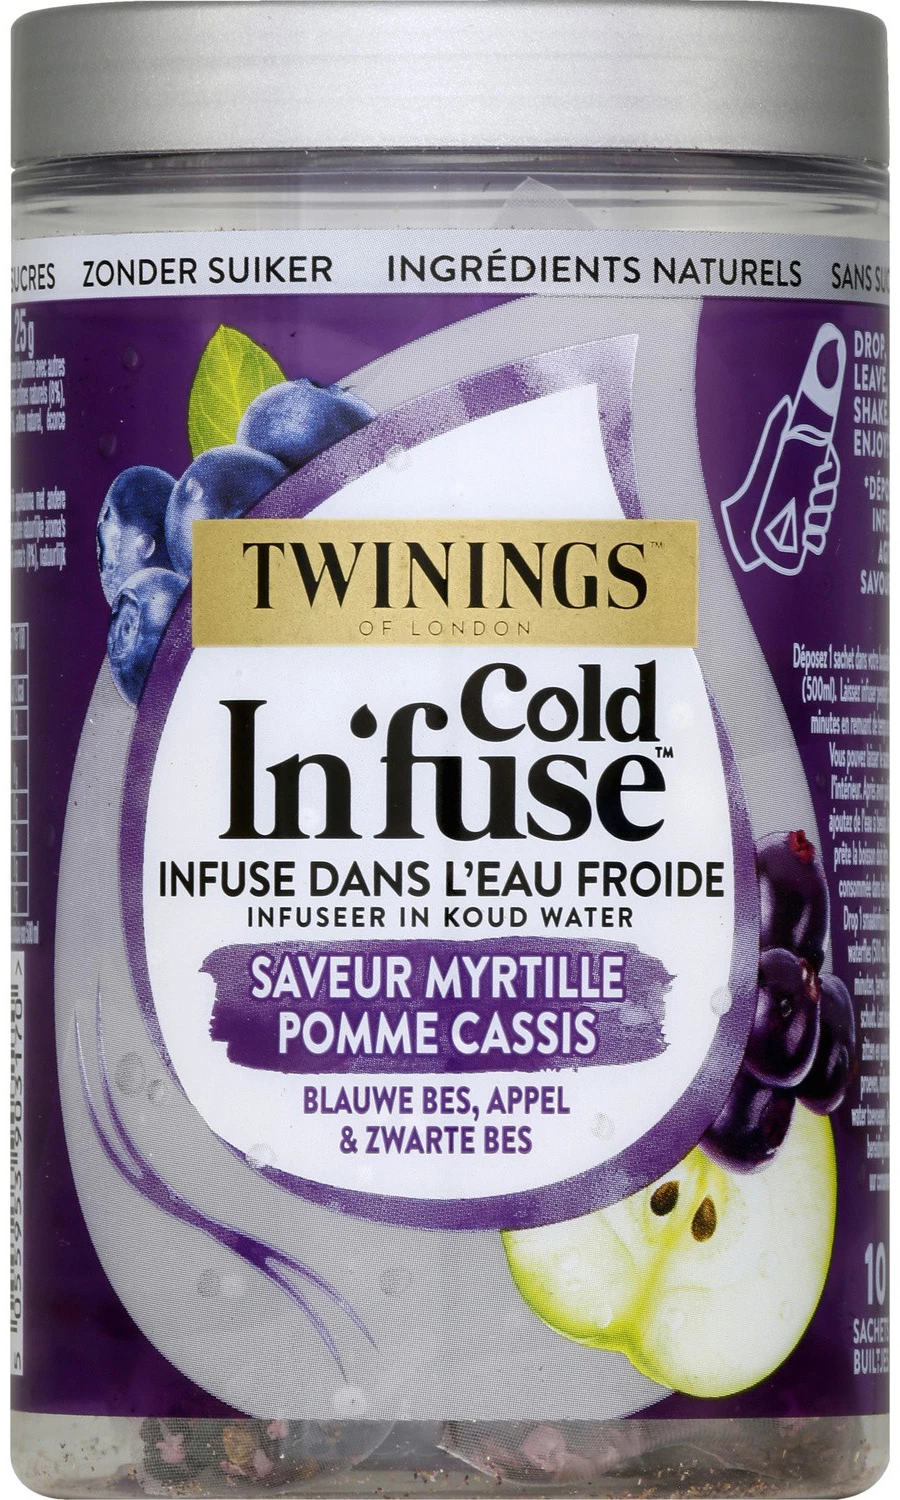 Infusion Froide Saveur Myrtille Pomme Cassis, 10 sachets, 250g - TWINNINGS